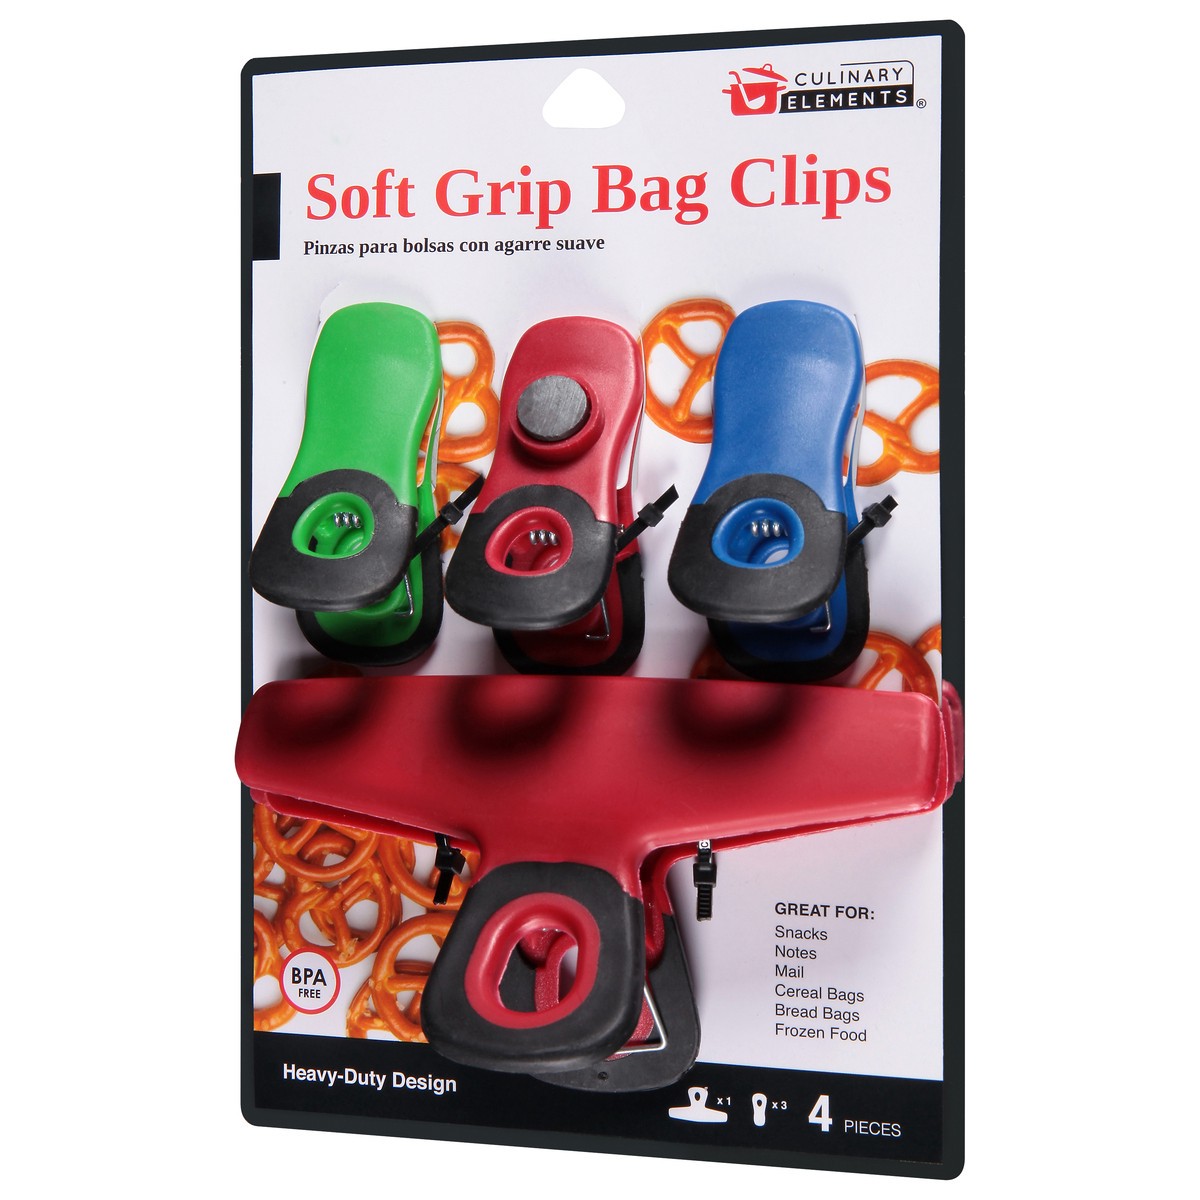 slide 4 of 12, Culinary Elements Lami Bag Clips - Soft Grip, 1 ct